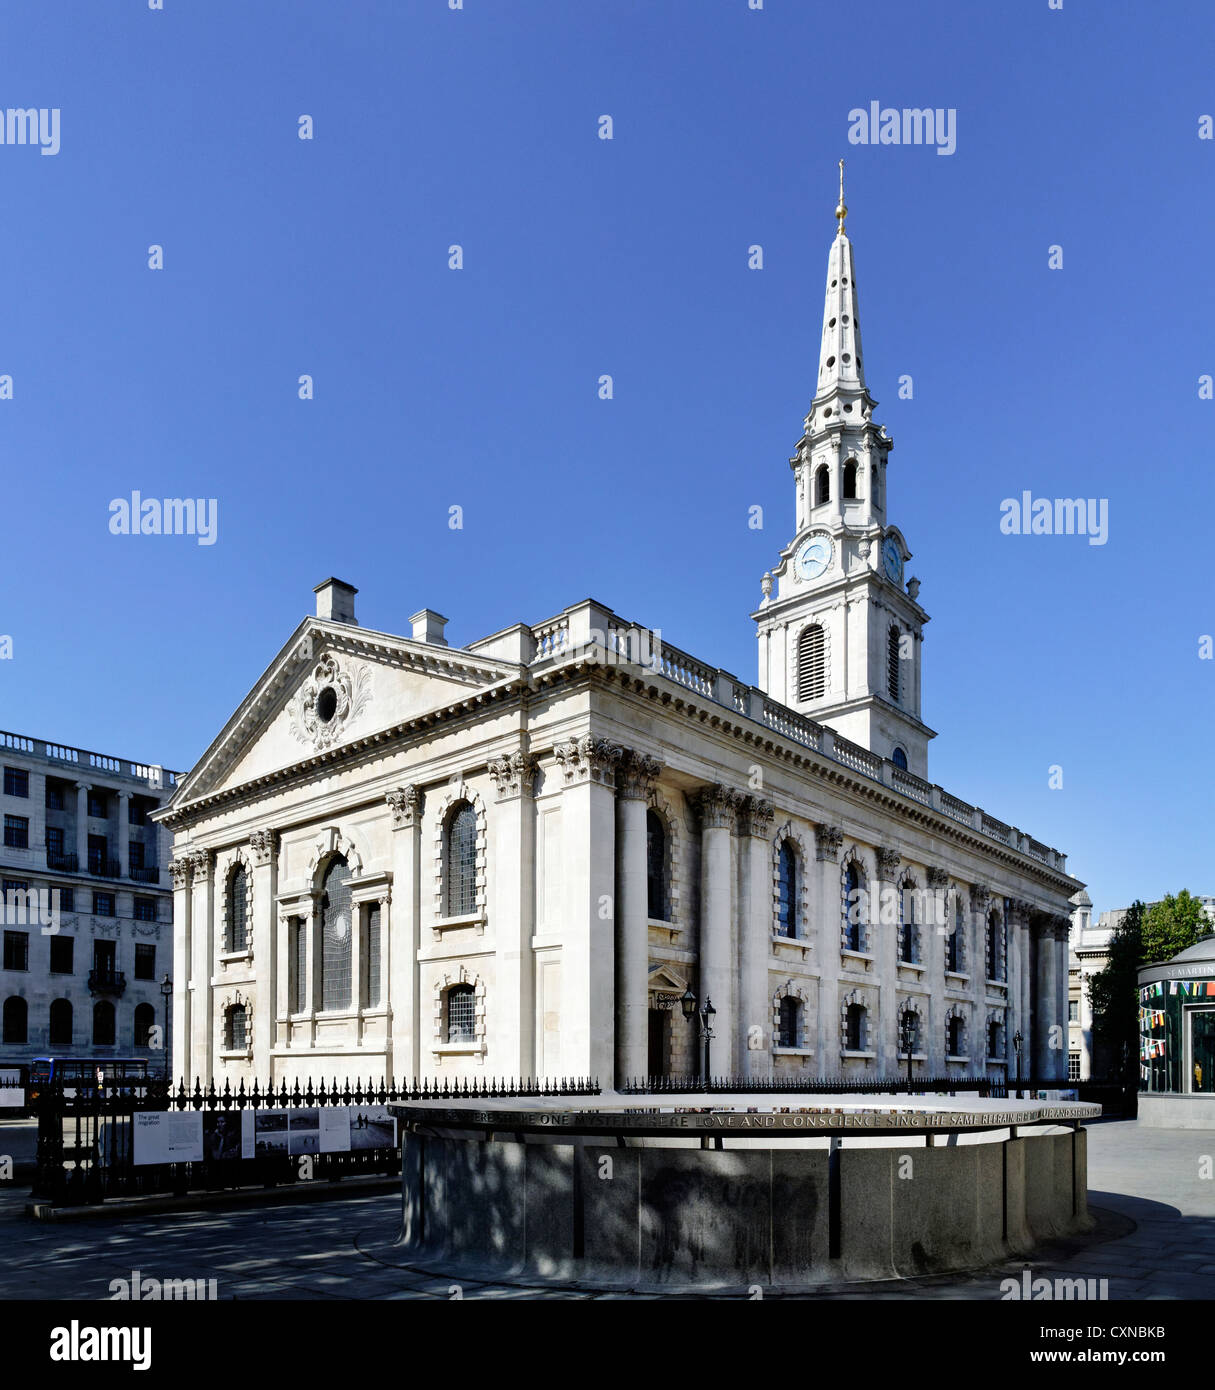 St Martin-in-the-Fields church, Trafalgar Square, London, UK Banque D'Images